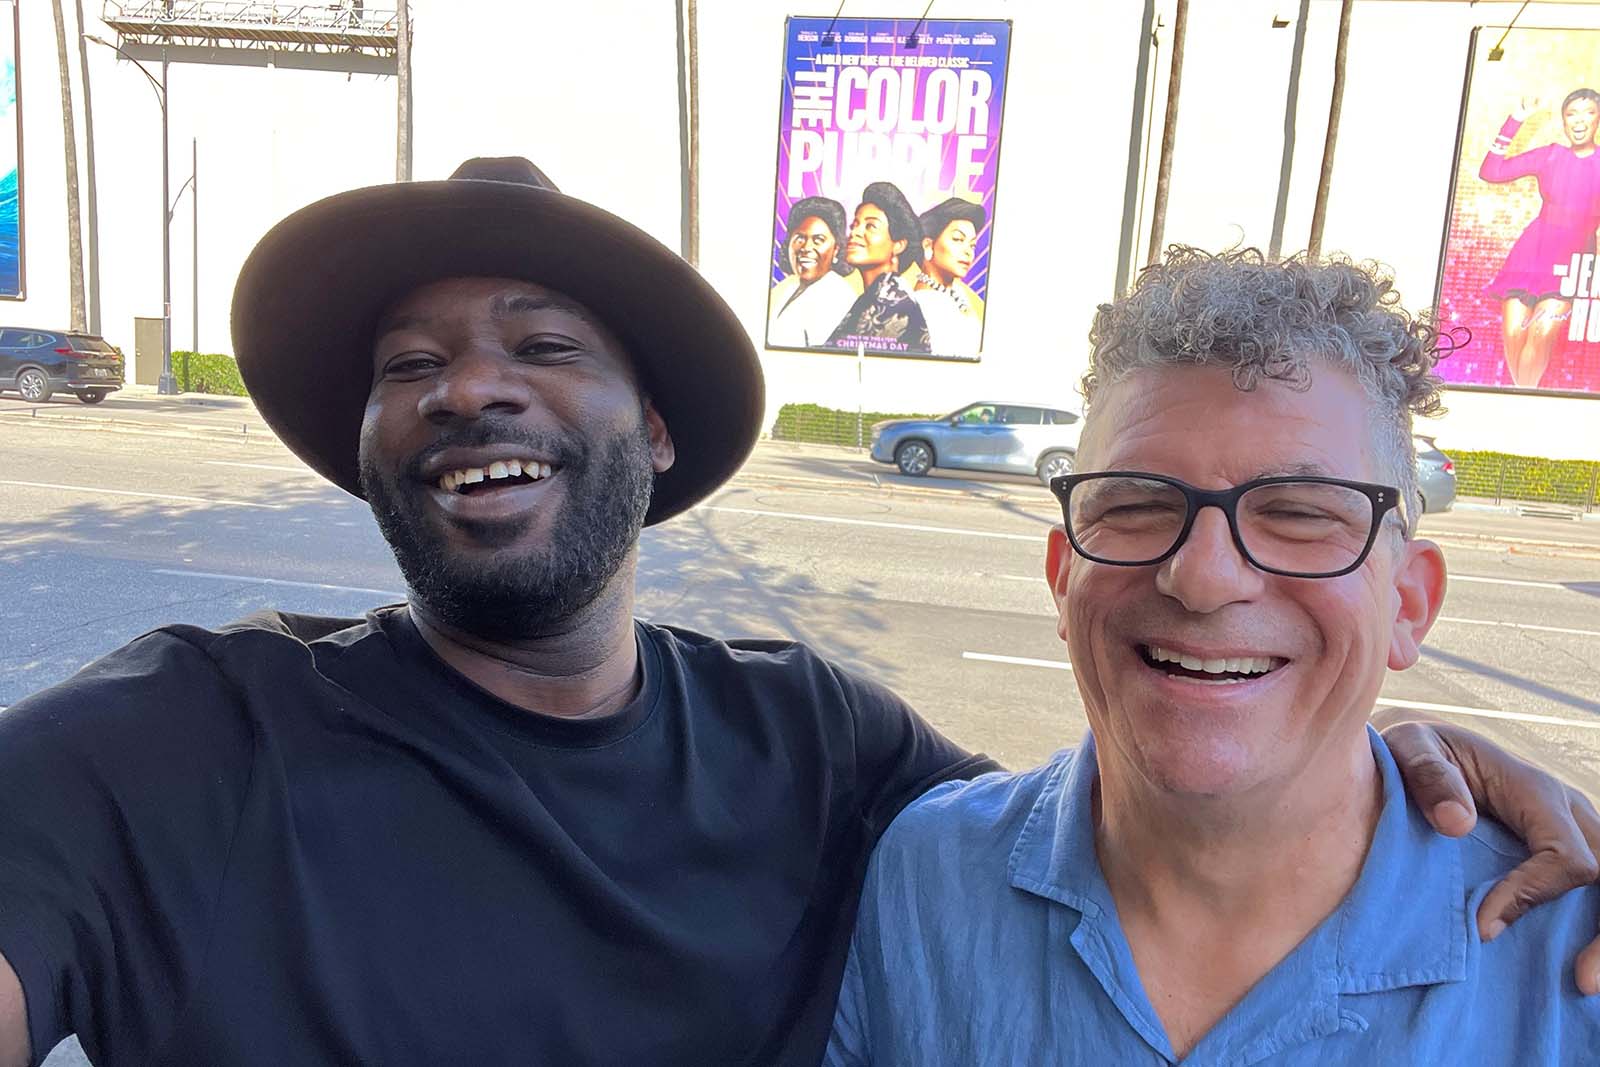 Director Bazawule and editor Jon Poll find a Color Purple movie poster in the wild.